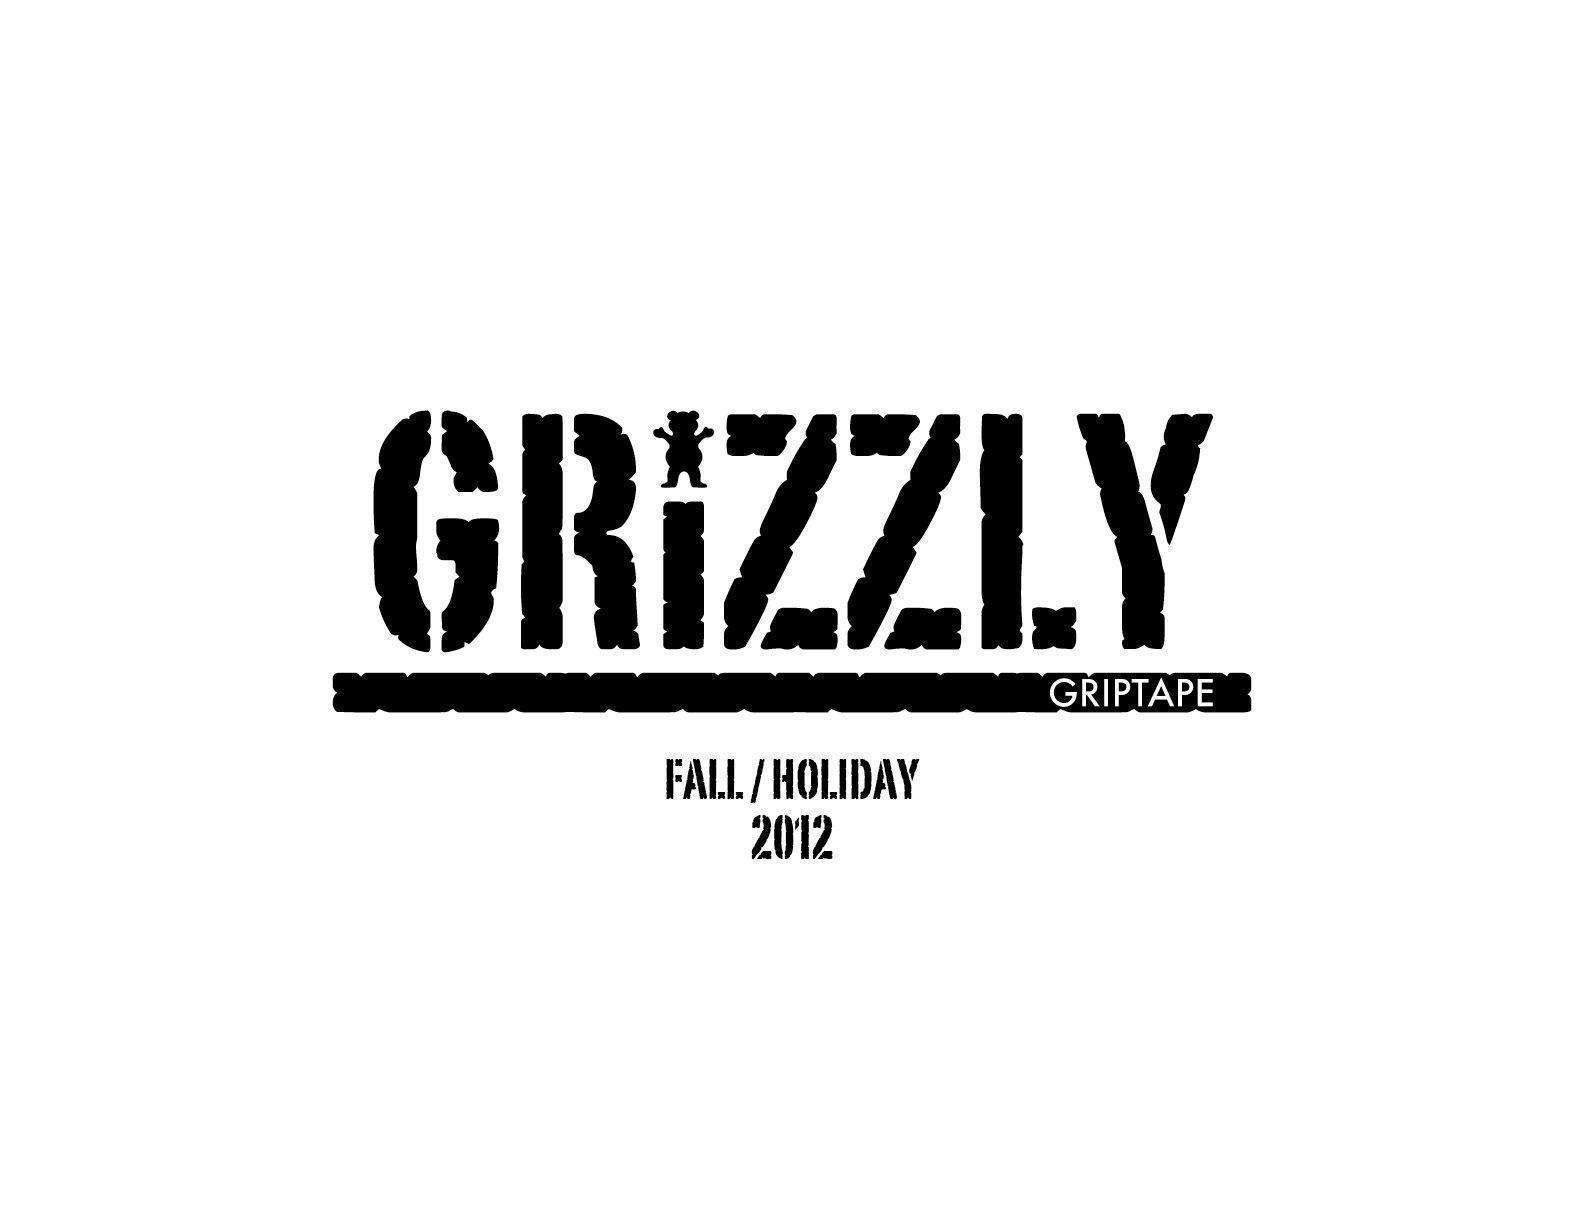 Grizzly Grip Wallpapers 120963 High Definition Wallpapers